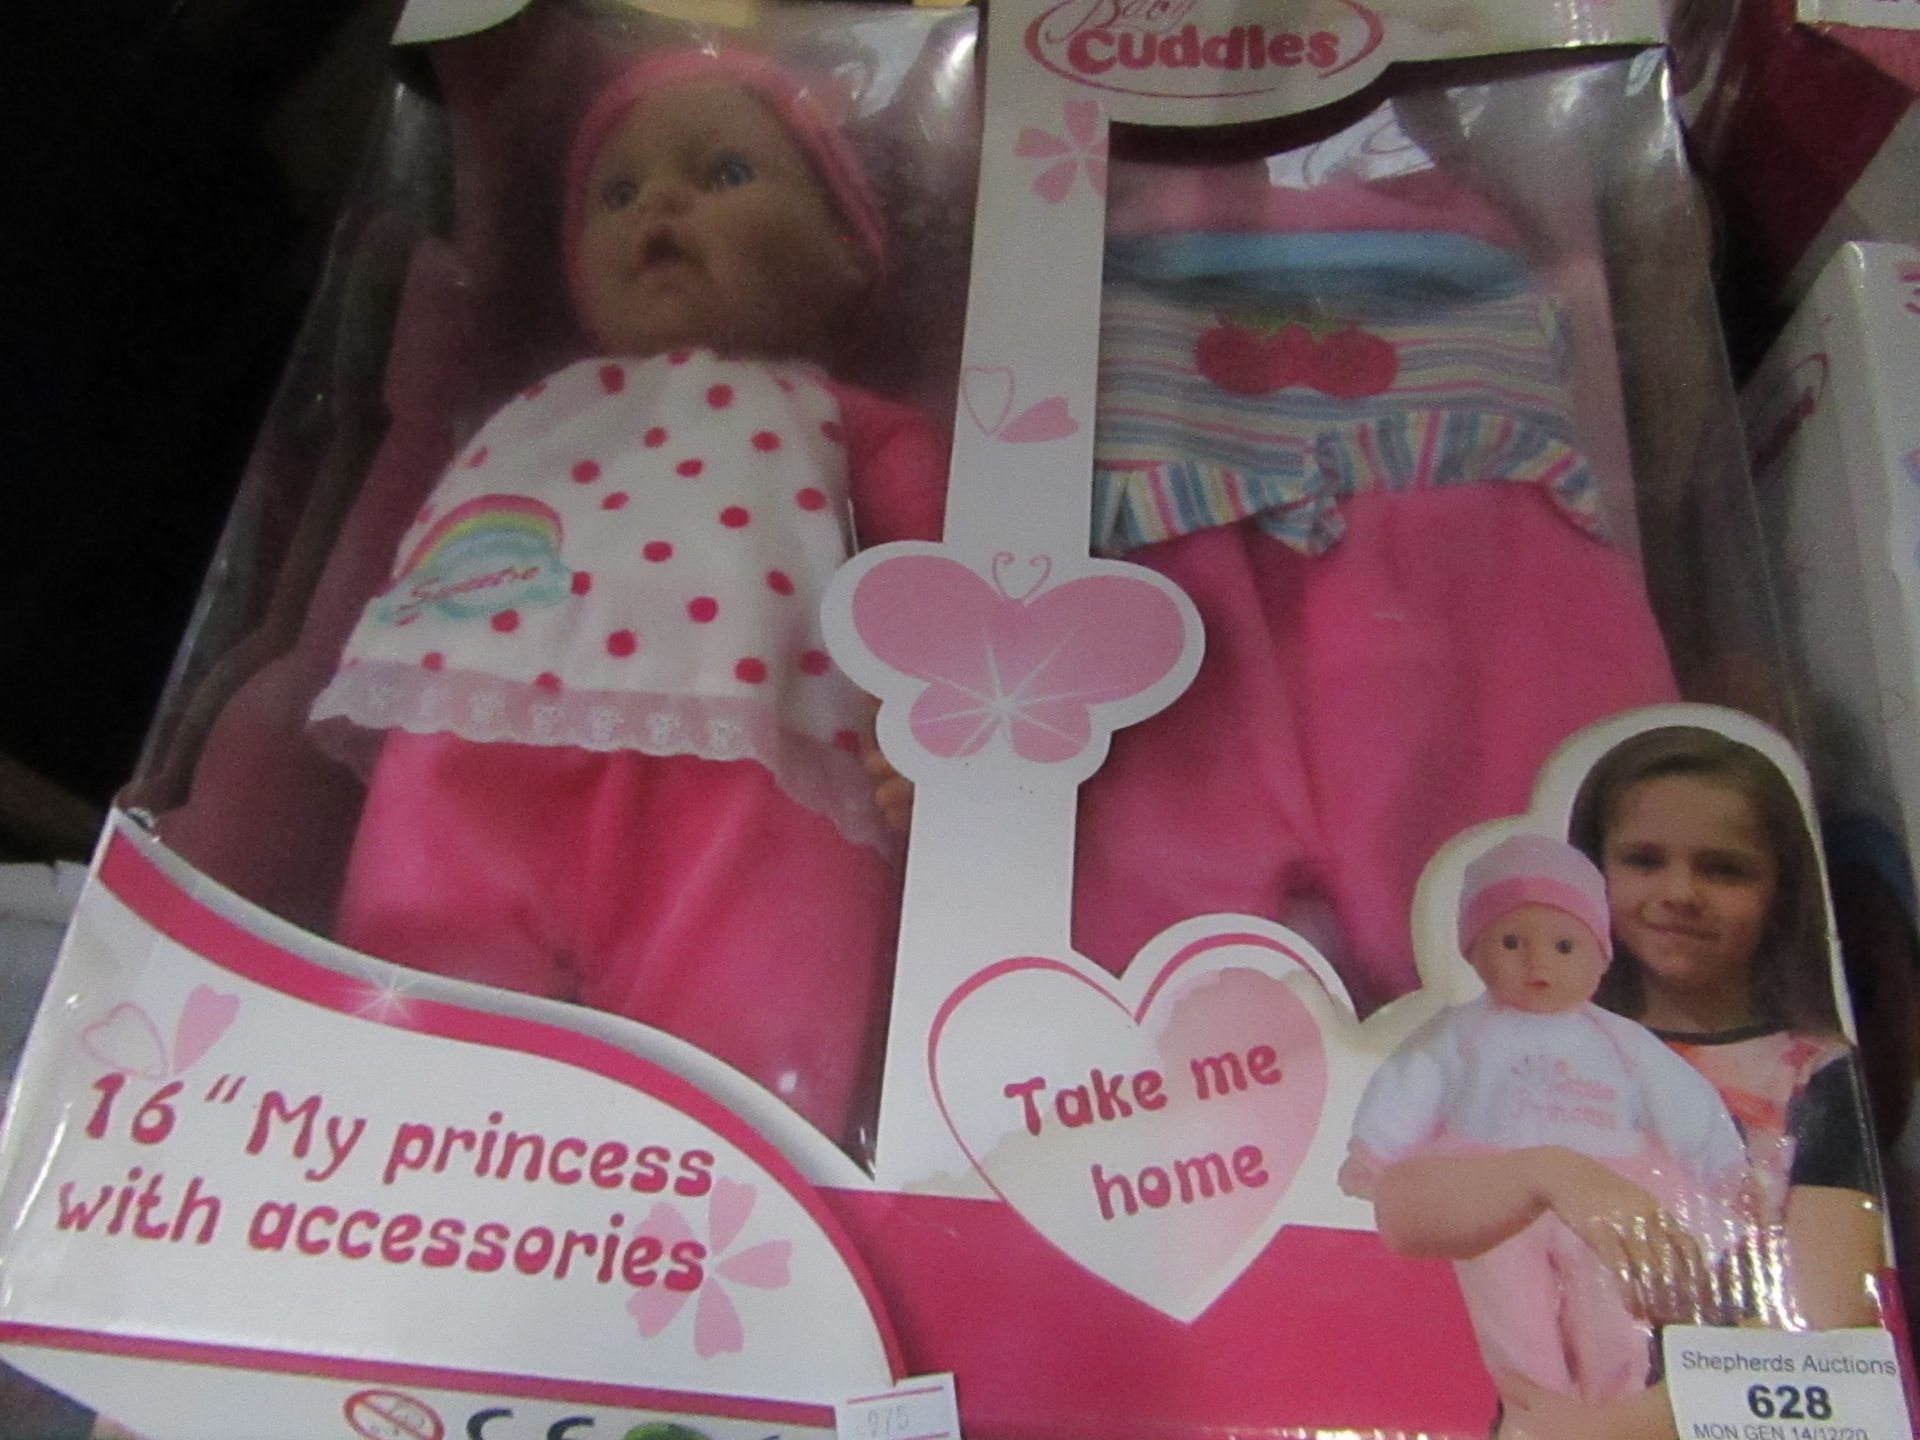 Baby cuddles 16" My Princess with Accessories. Outer box is slightly damaged but item is fine